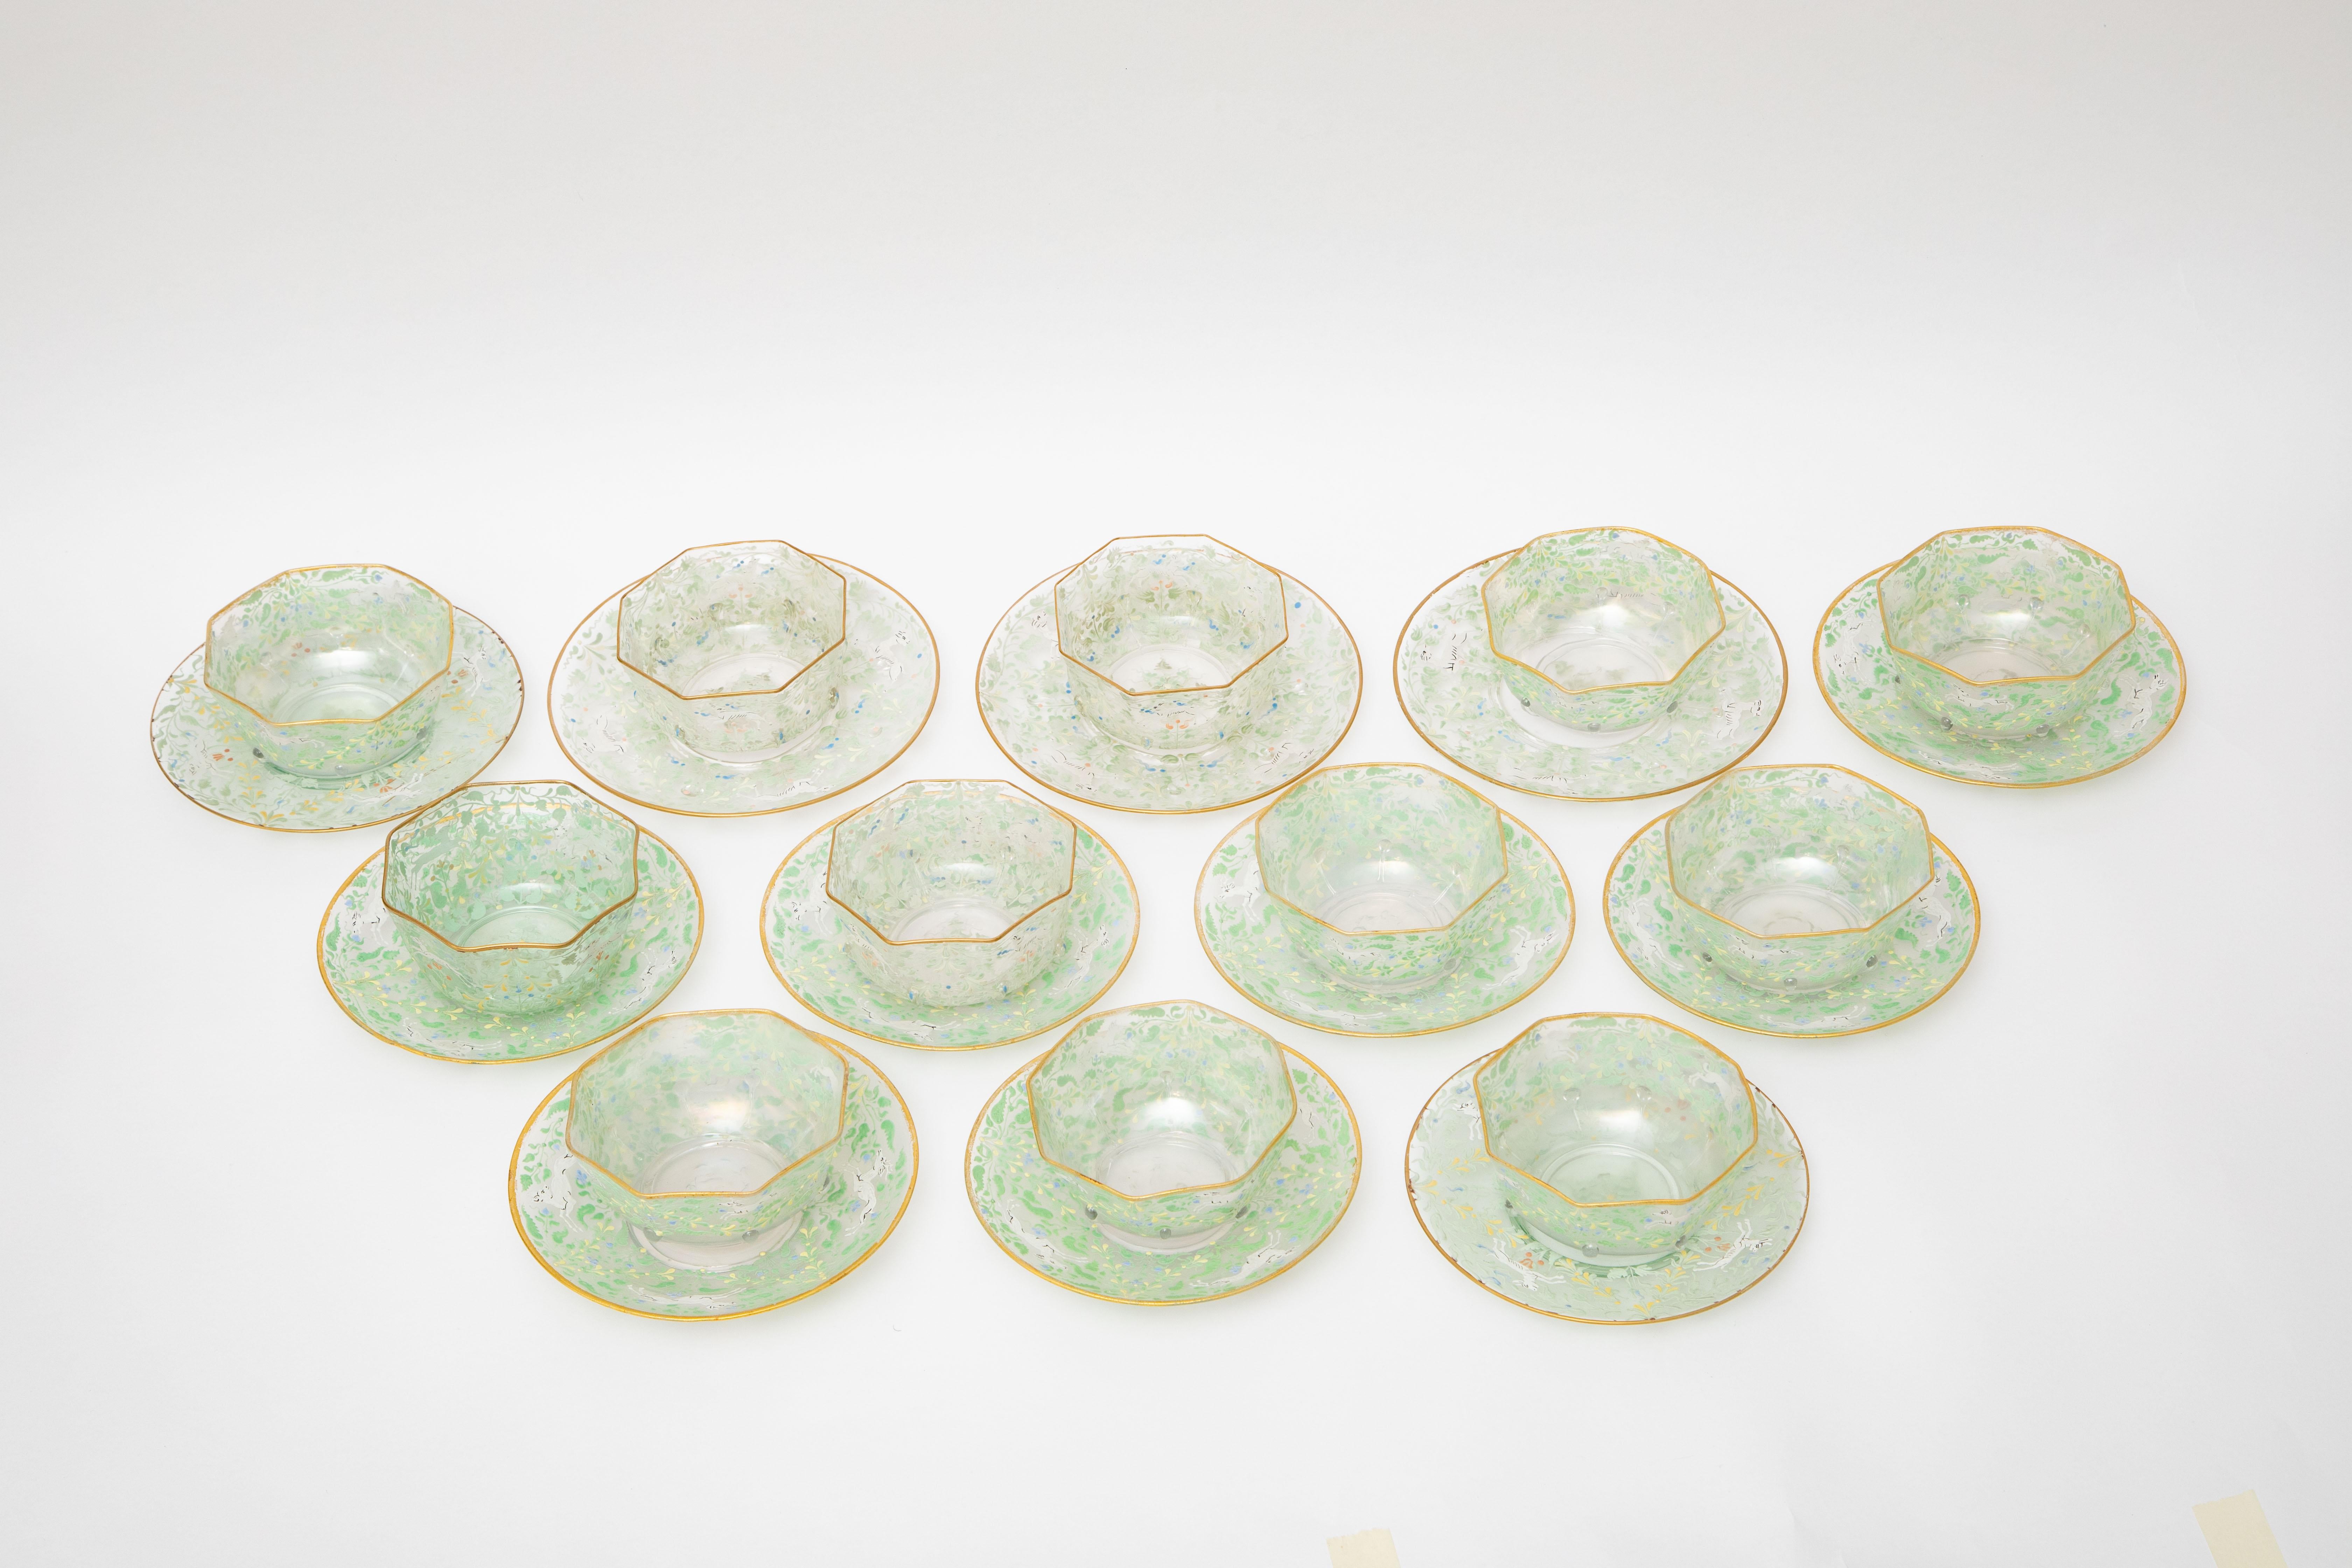 Hand-Crafted 24 Piece Bowl & under Plate Antique Venetian Glass, circa 1890, Hand Enameled